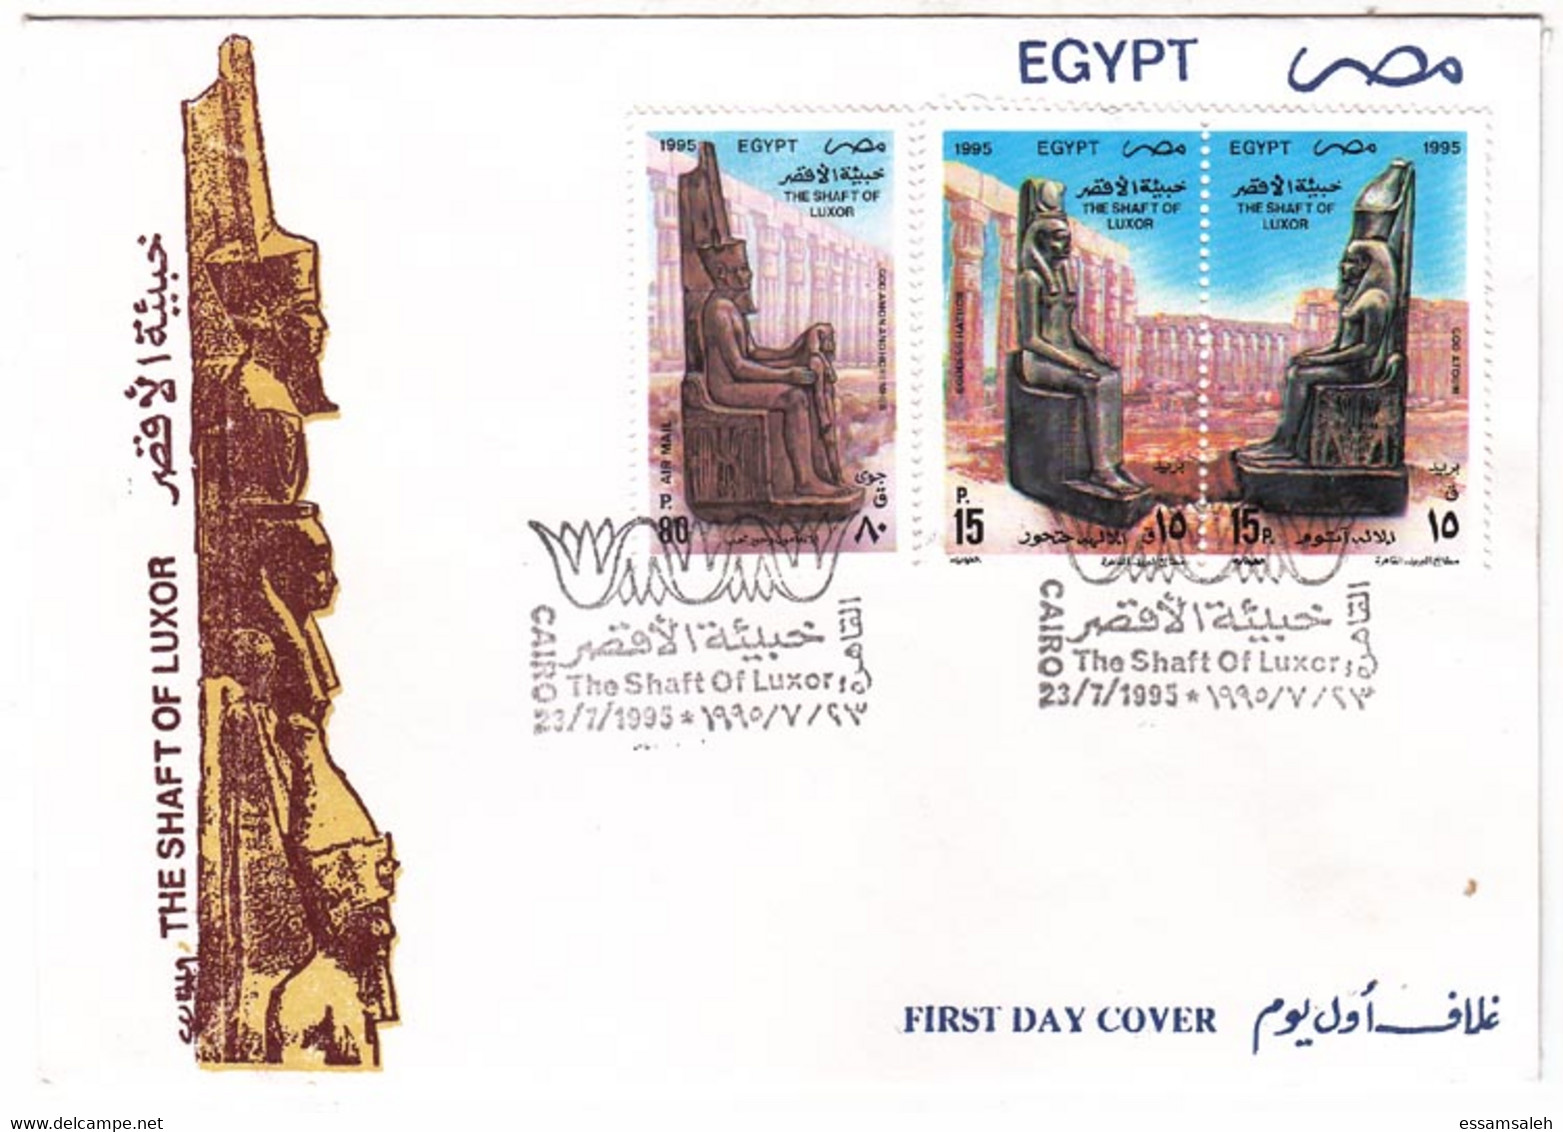 EGS30608 Egypt 1995 Illustrated FDC The Shaft Of Luxor - Statues Of The Gods Hathor, Atum, Amun, And Horemheb - Briefe U. Dokumente